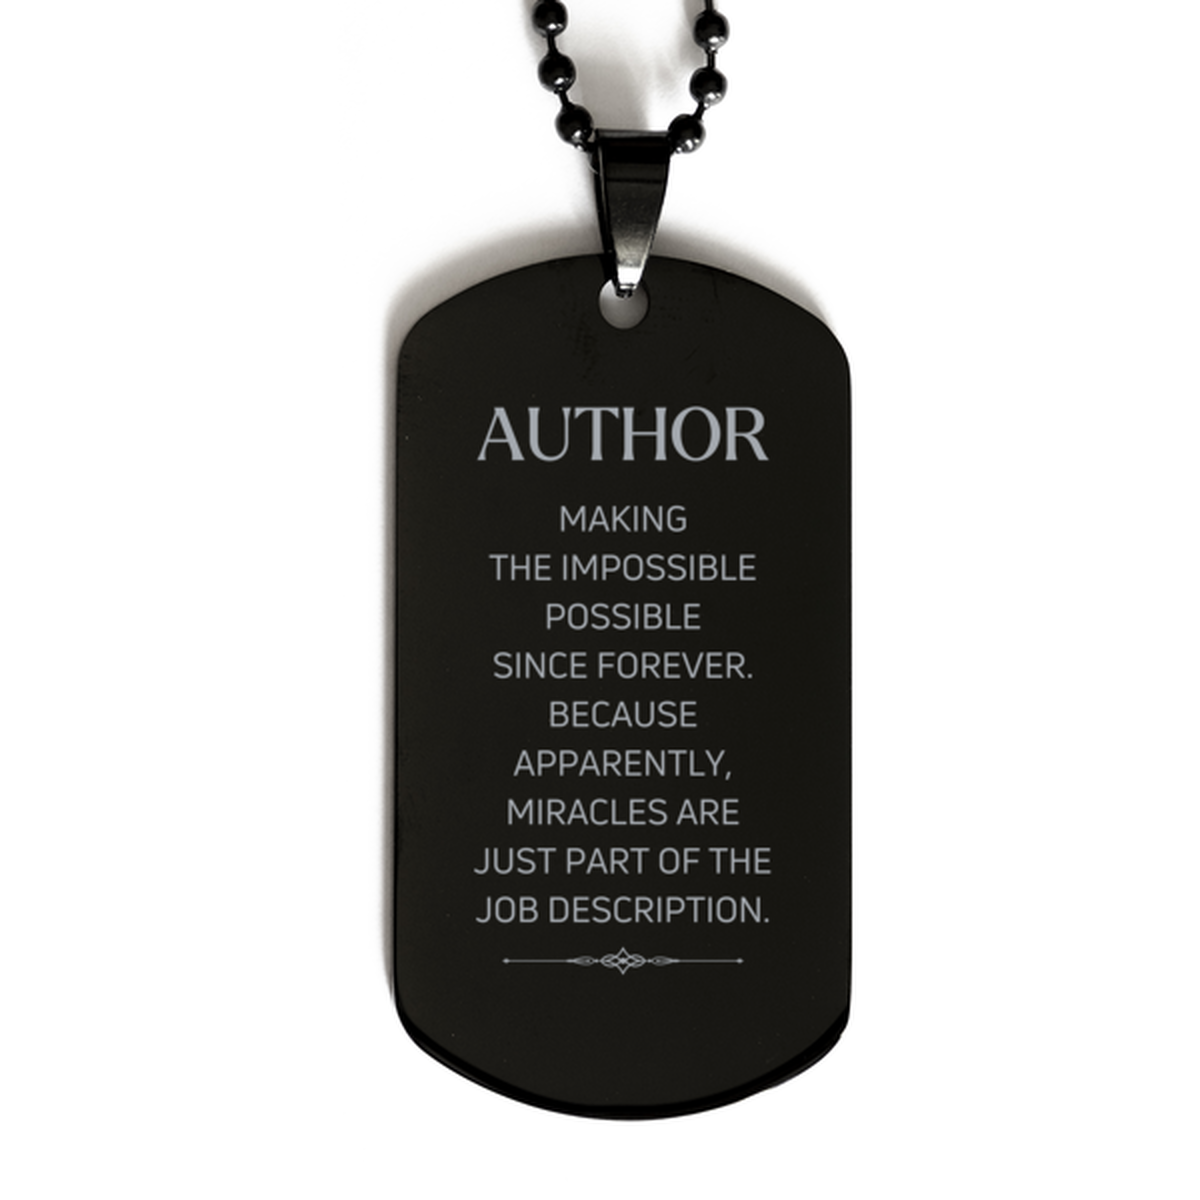 Funny Author Gifts, Miracles are just part of the job description, Inspirational Birthday Black Dog Tag For Author, Men, Women, Coworkers, Friends, Boss